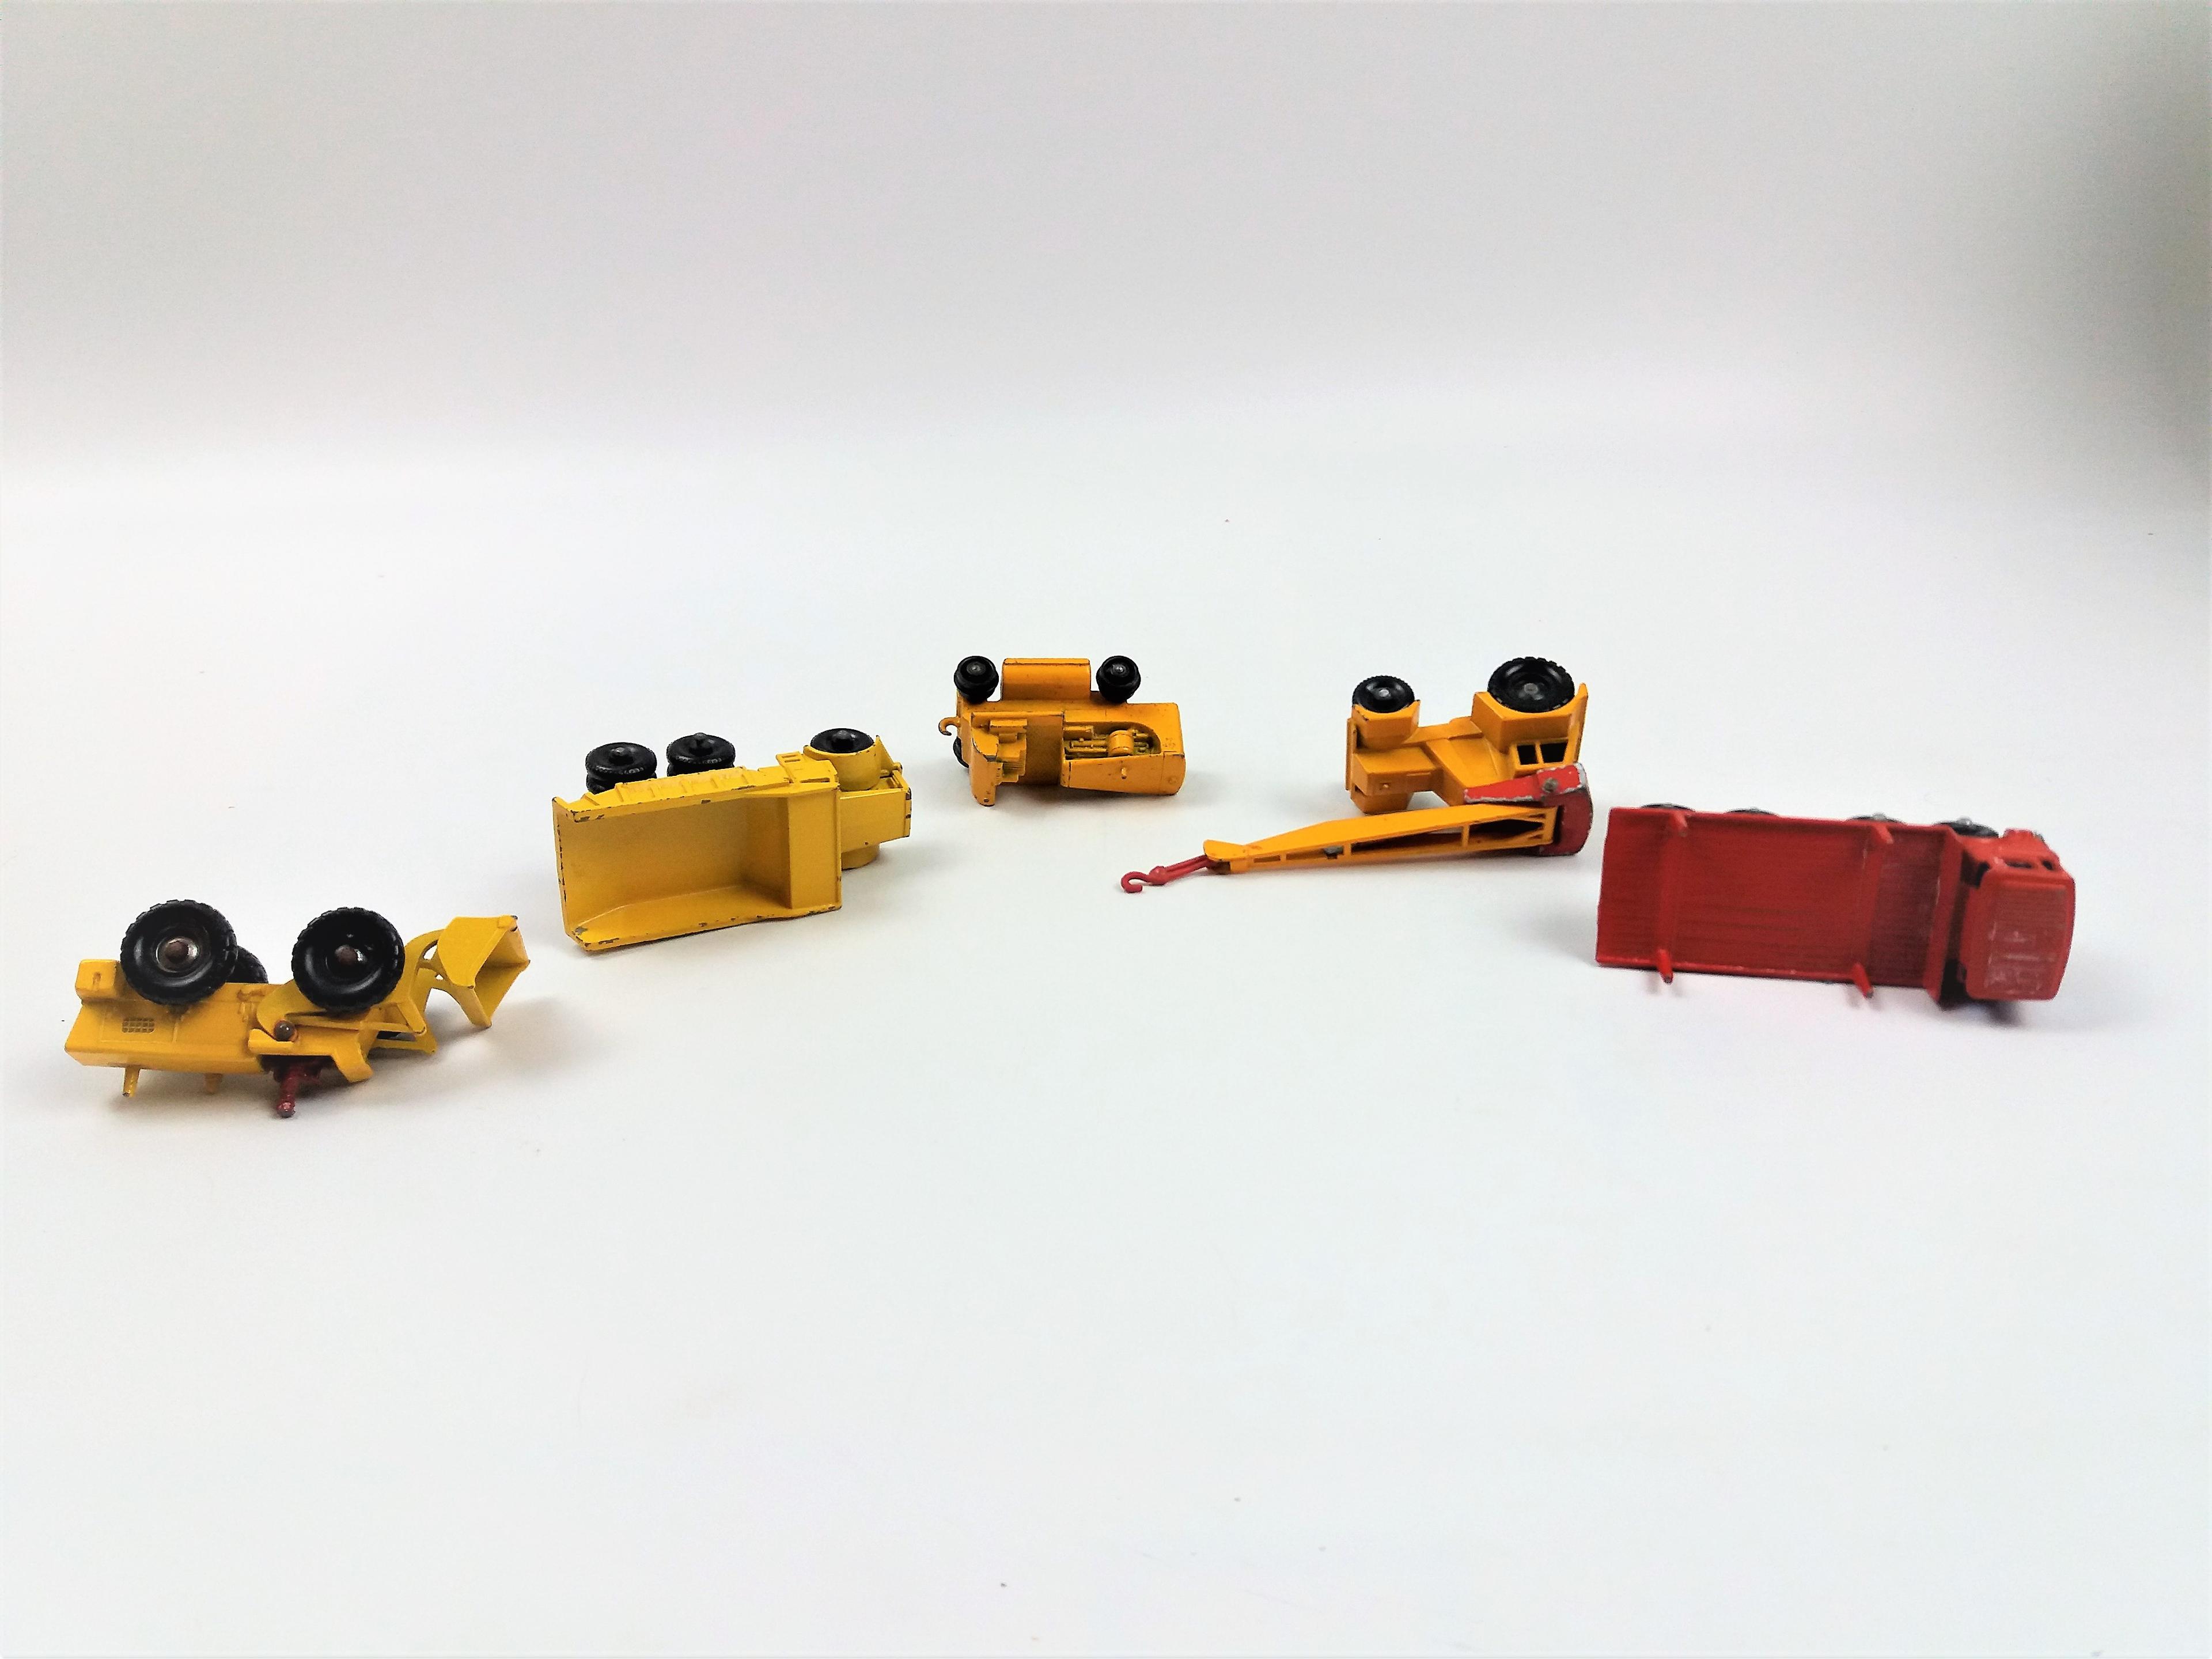 Vintage Lesney Diecast Vehicle Grouping